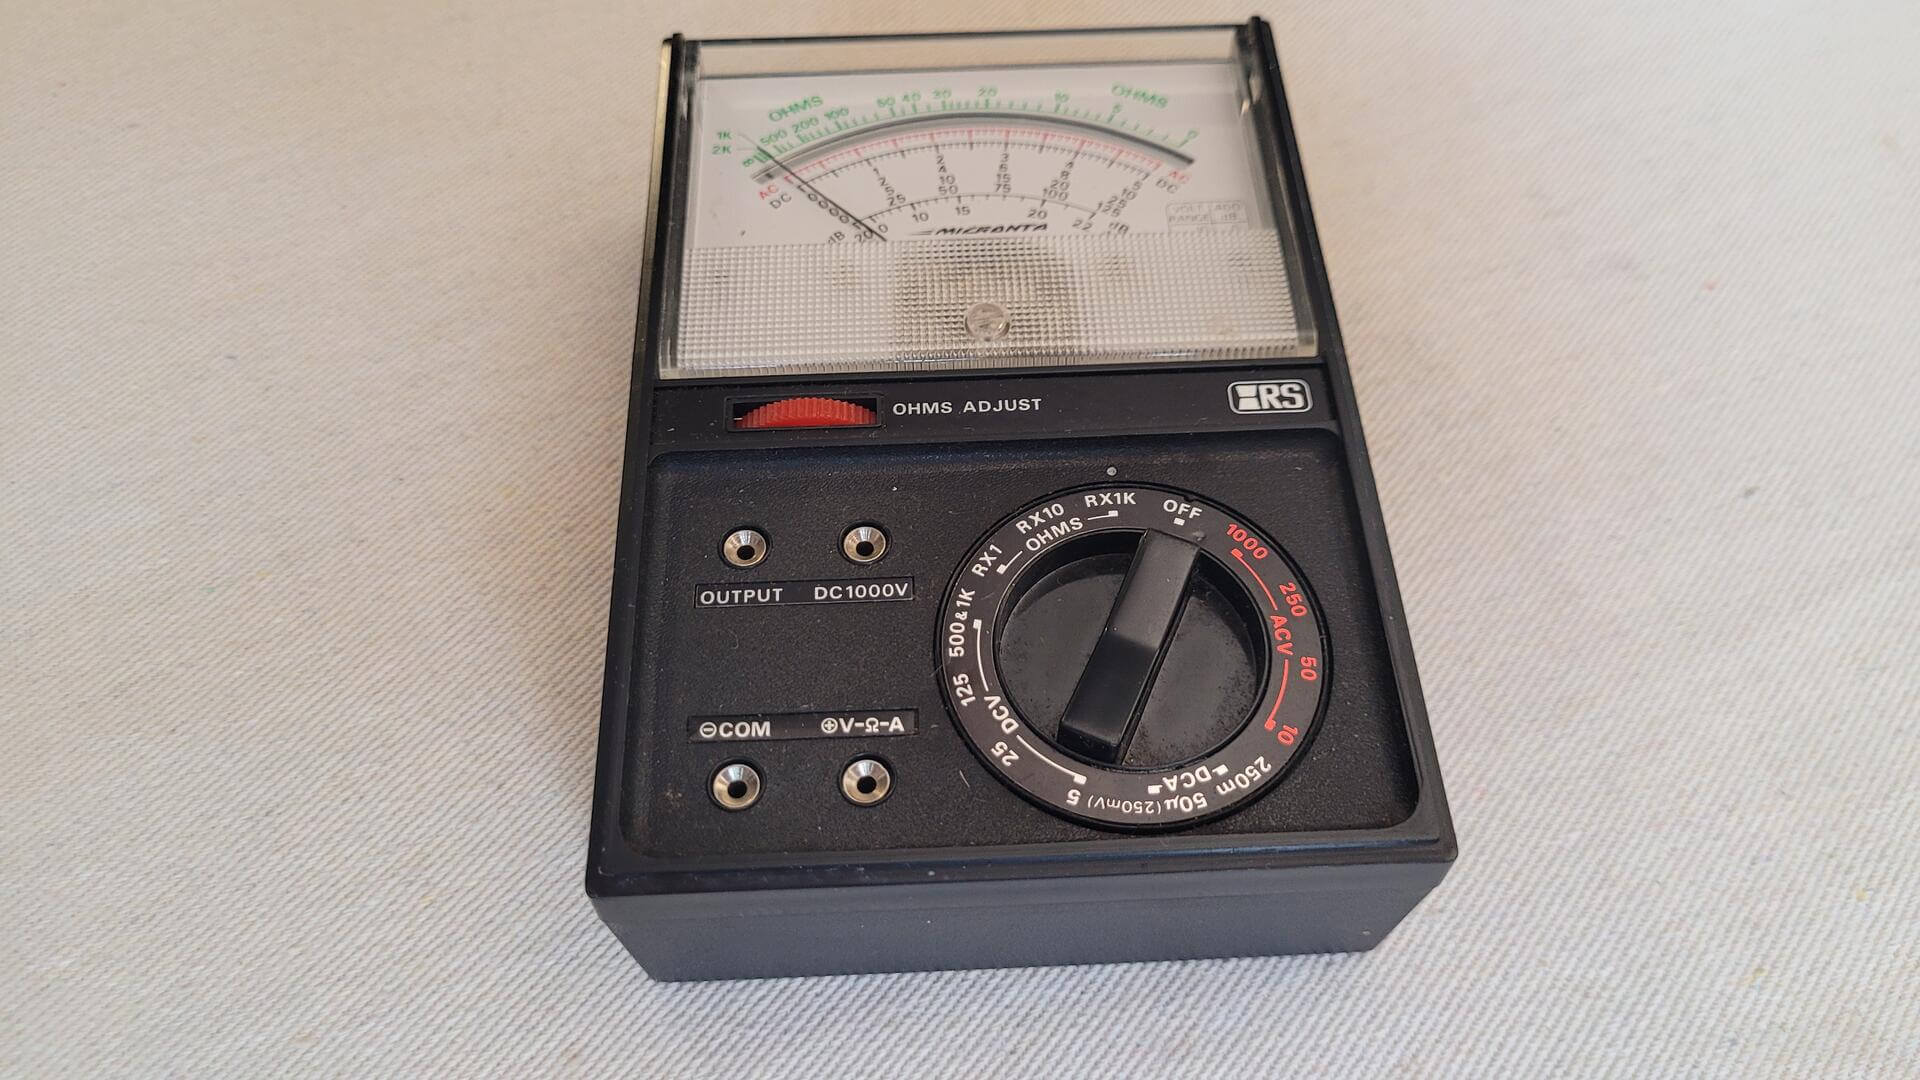 Vintage Micronta analog multimeter 22-201A 18 ranges multitester tool with the original box. 1970s made in Korea collectible automotive and electronics service and lab equipment from Radio Shack / Tandy